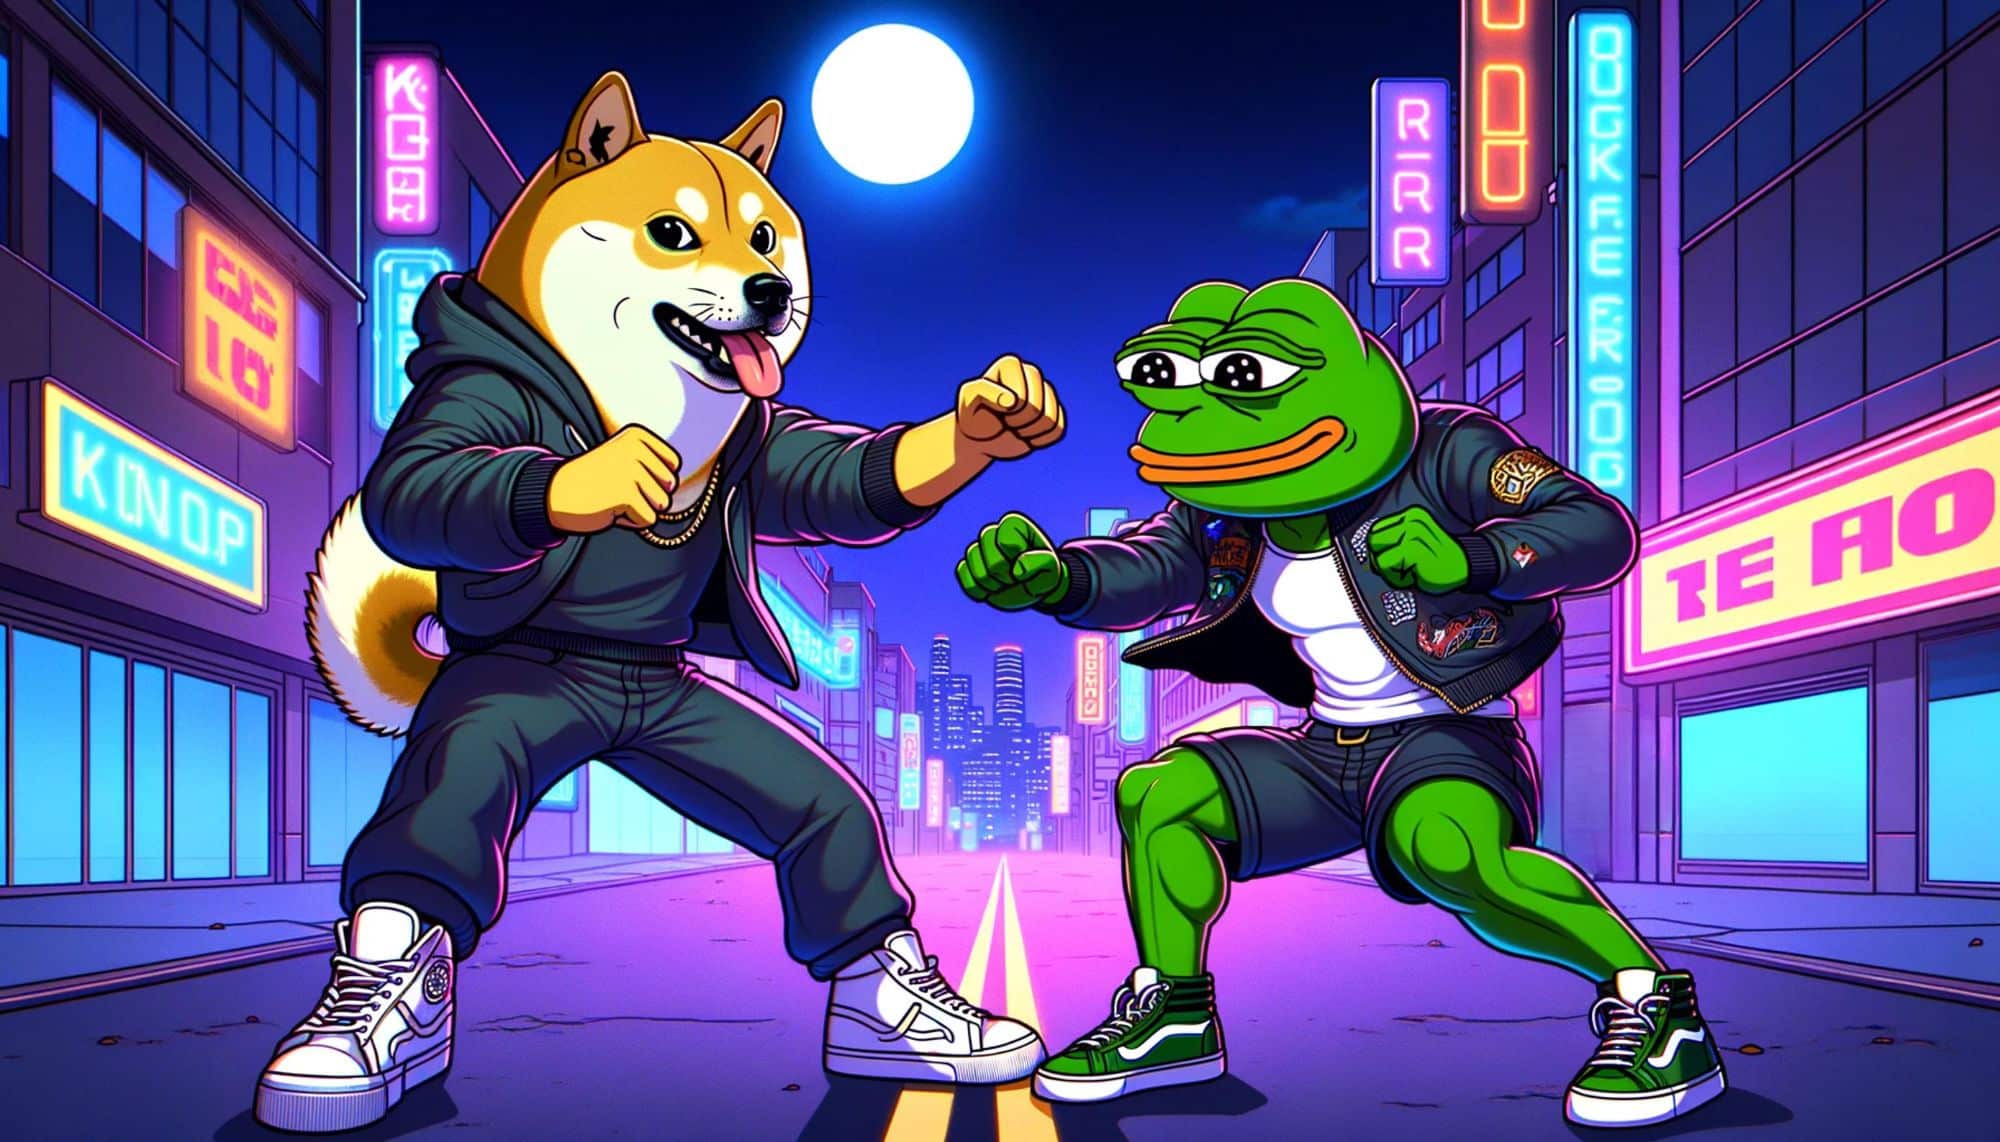 meme characters doge and pepe the frog are fighting against a backdrop of city lights